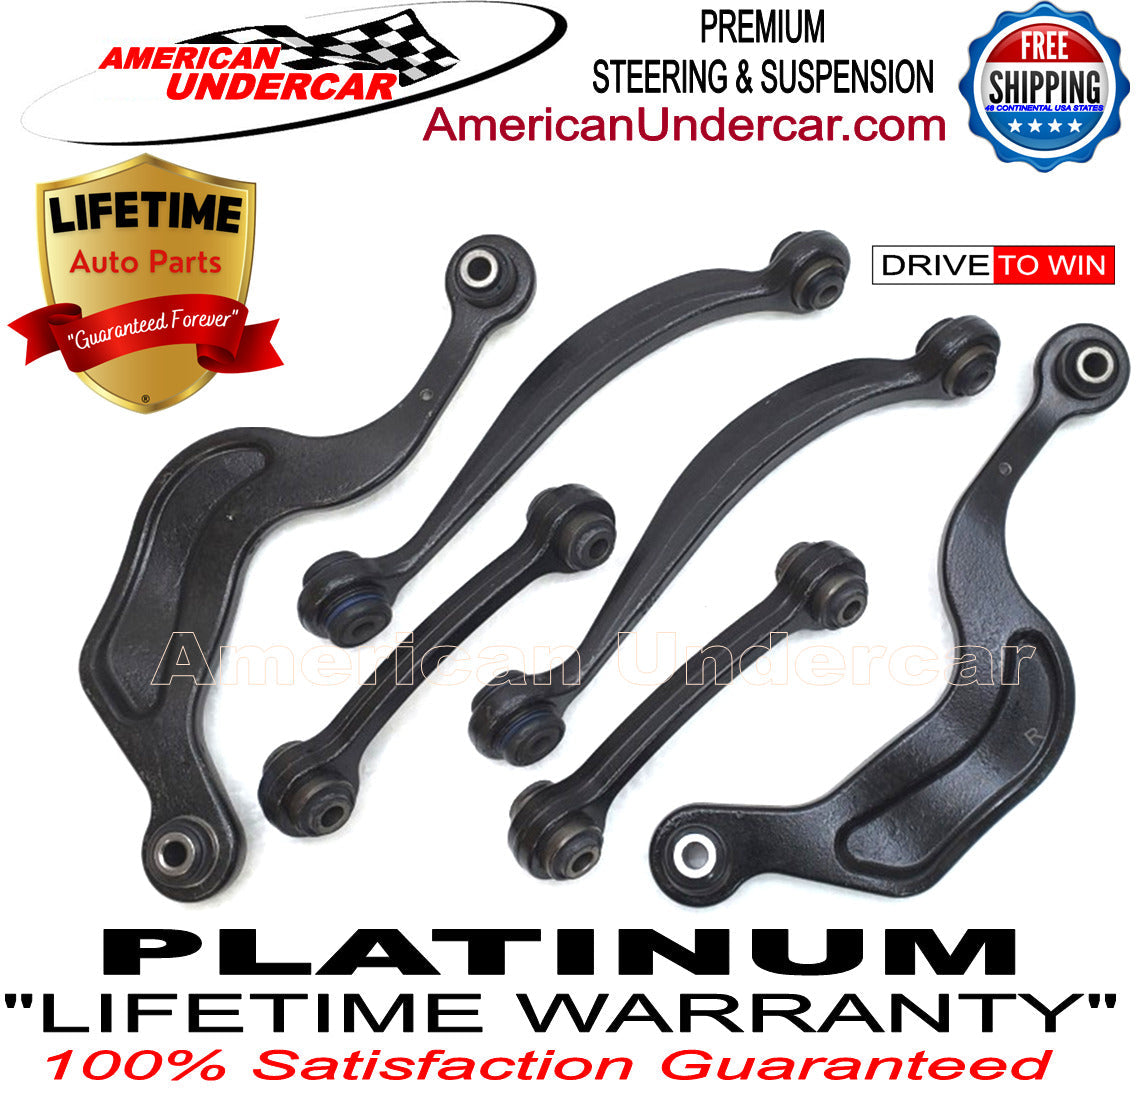 Lifetime Control Arm Link Rear Suspension Kit for 2009-2017 Chevrolet Traverse 2WD, AWD